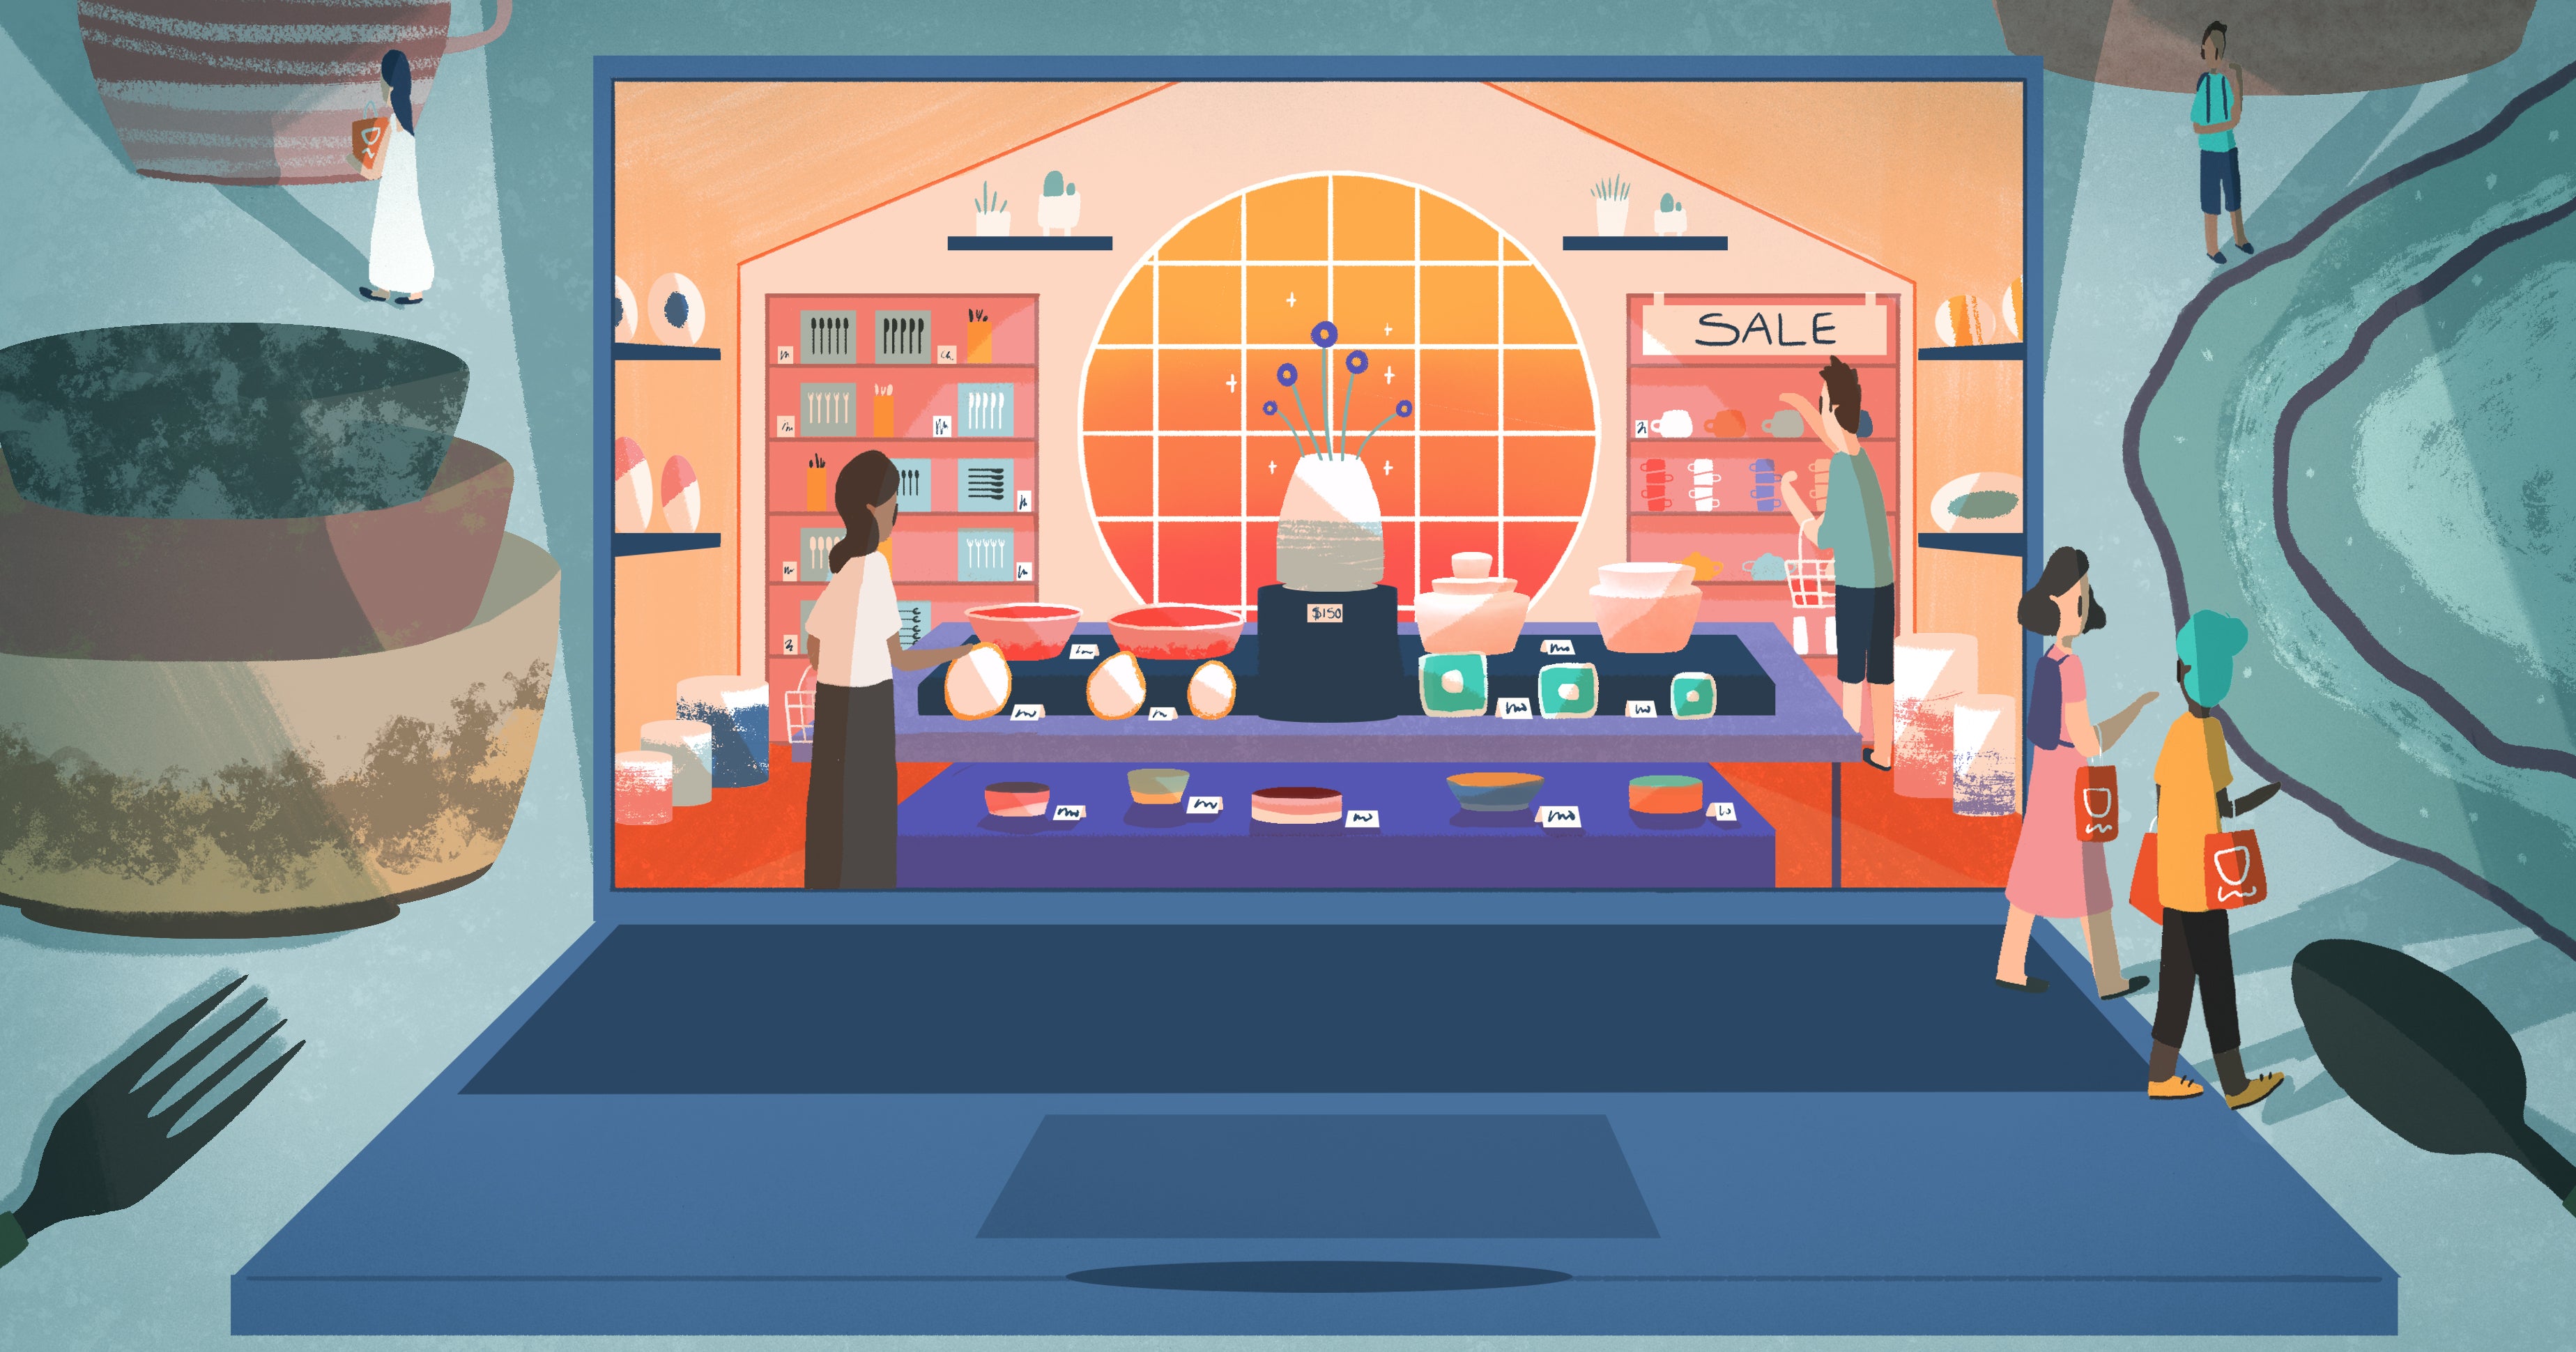 Illustration of a shop's inventory being organized into the front display or shelves on the side of the store to optimize for sales